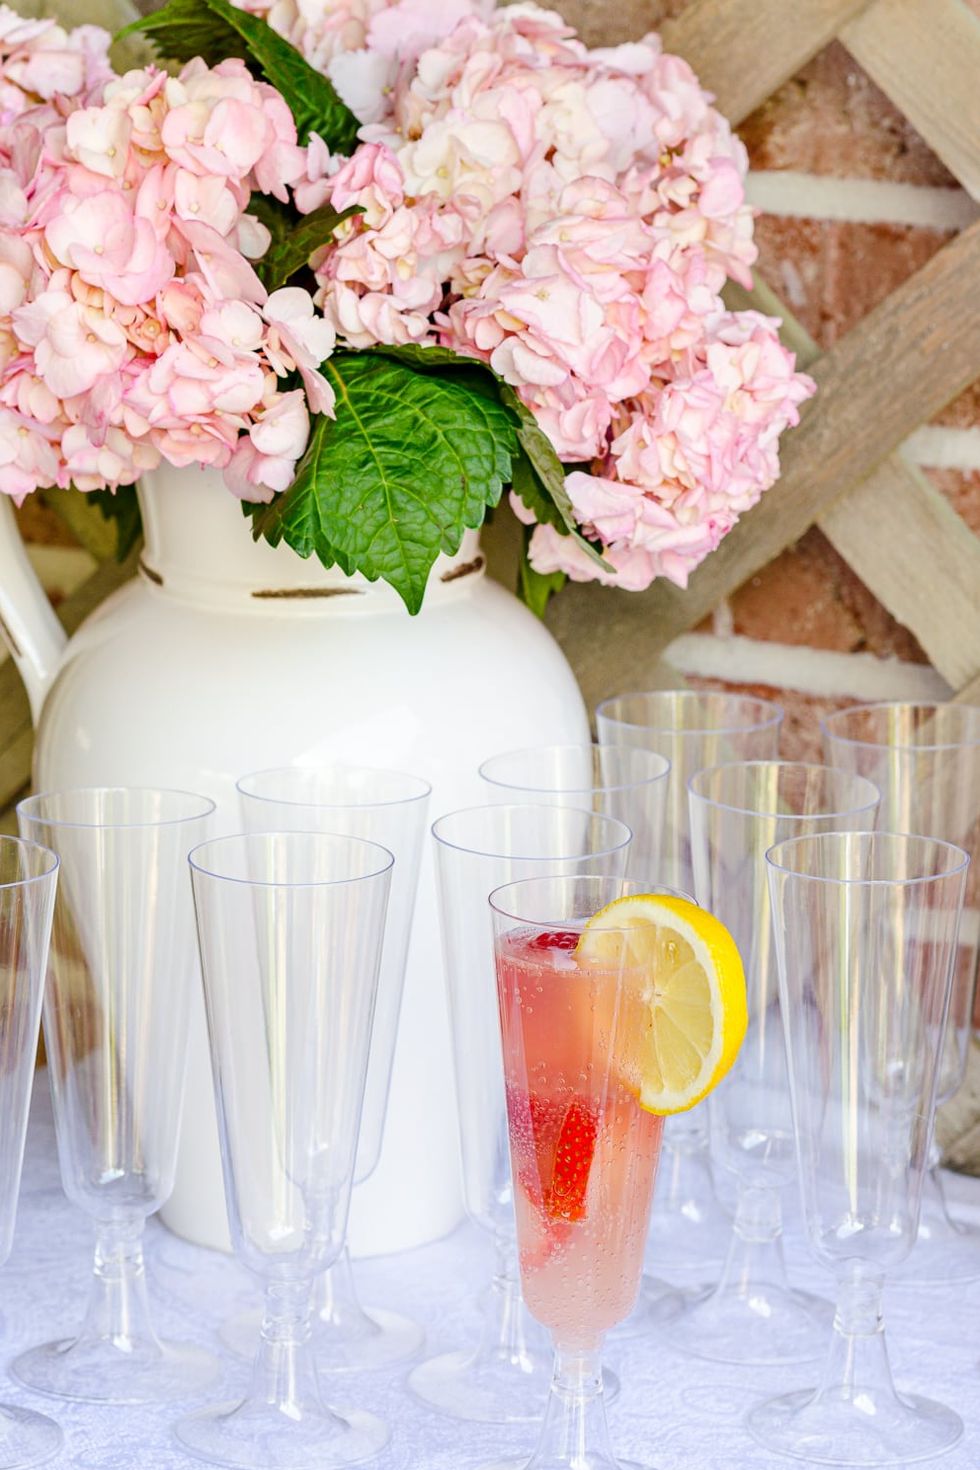 https://hips.hearstapps.com/hmg-prod/images/first-day-of-home-diy-mimosa-bar-ideas-641c7a5d0c200.jpeg?crop=0.937xw:0.931xh;0,0&resize=980:*